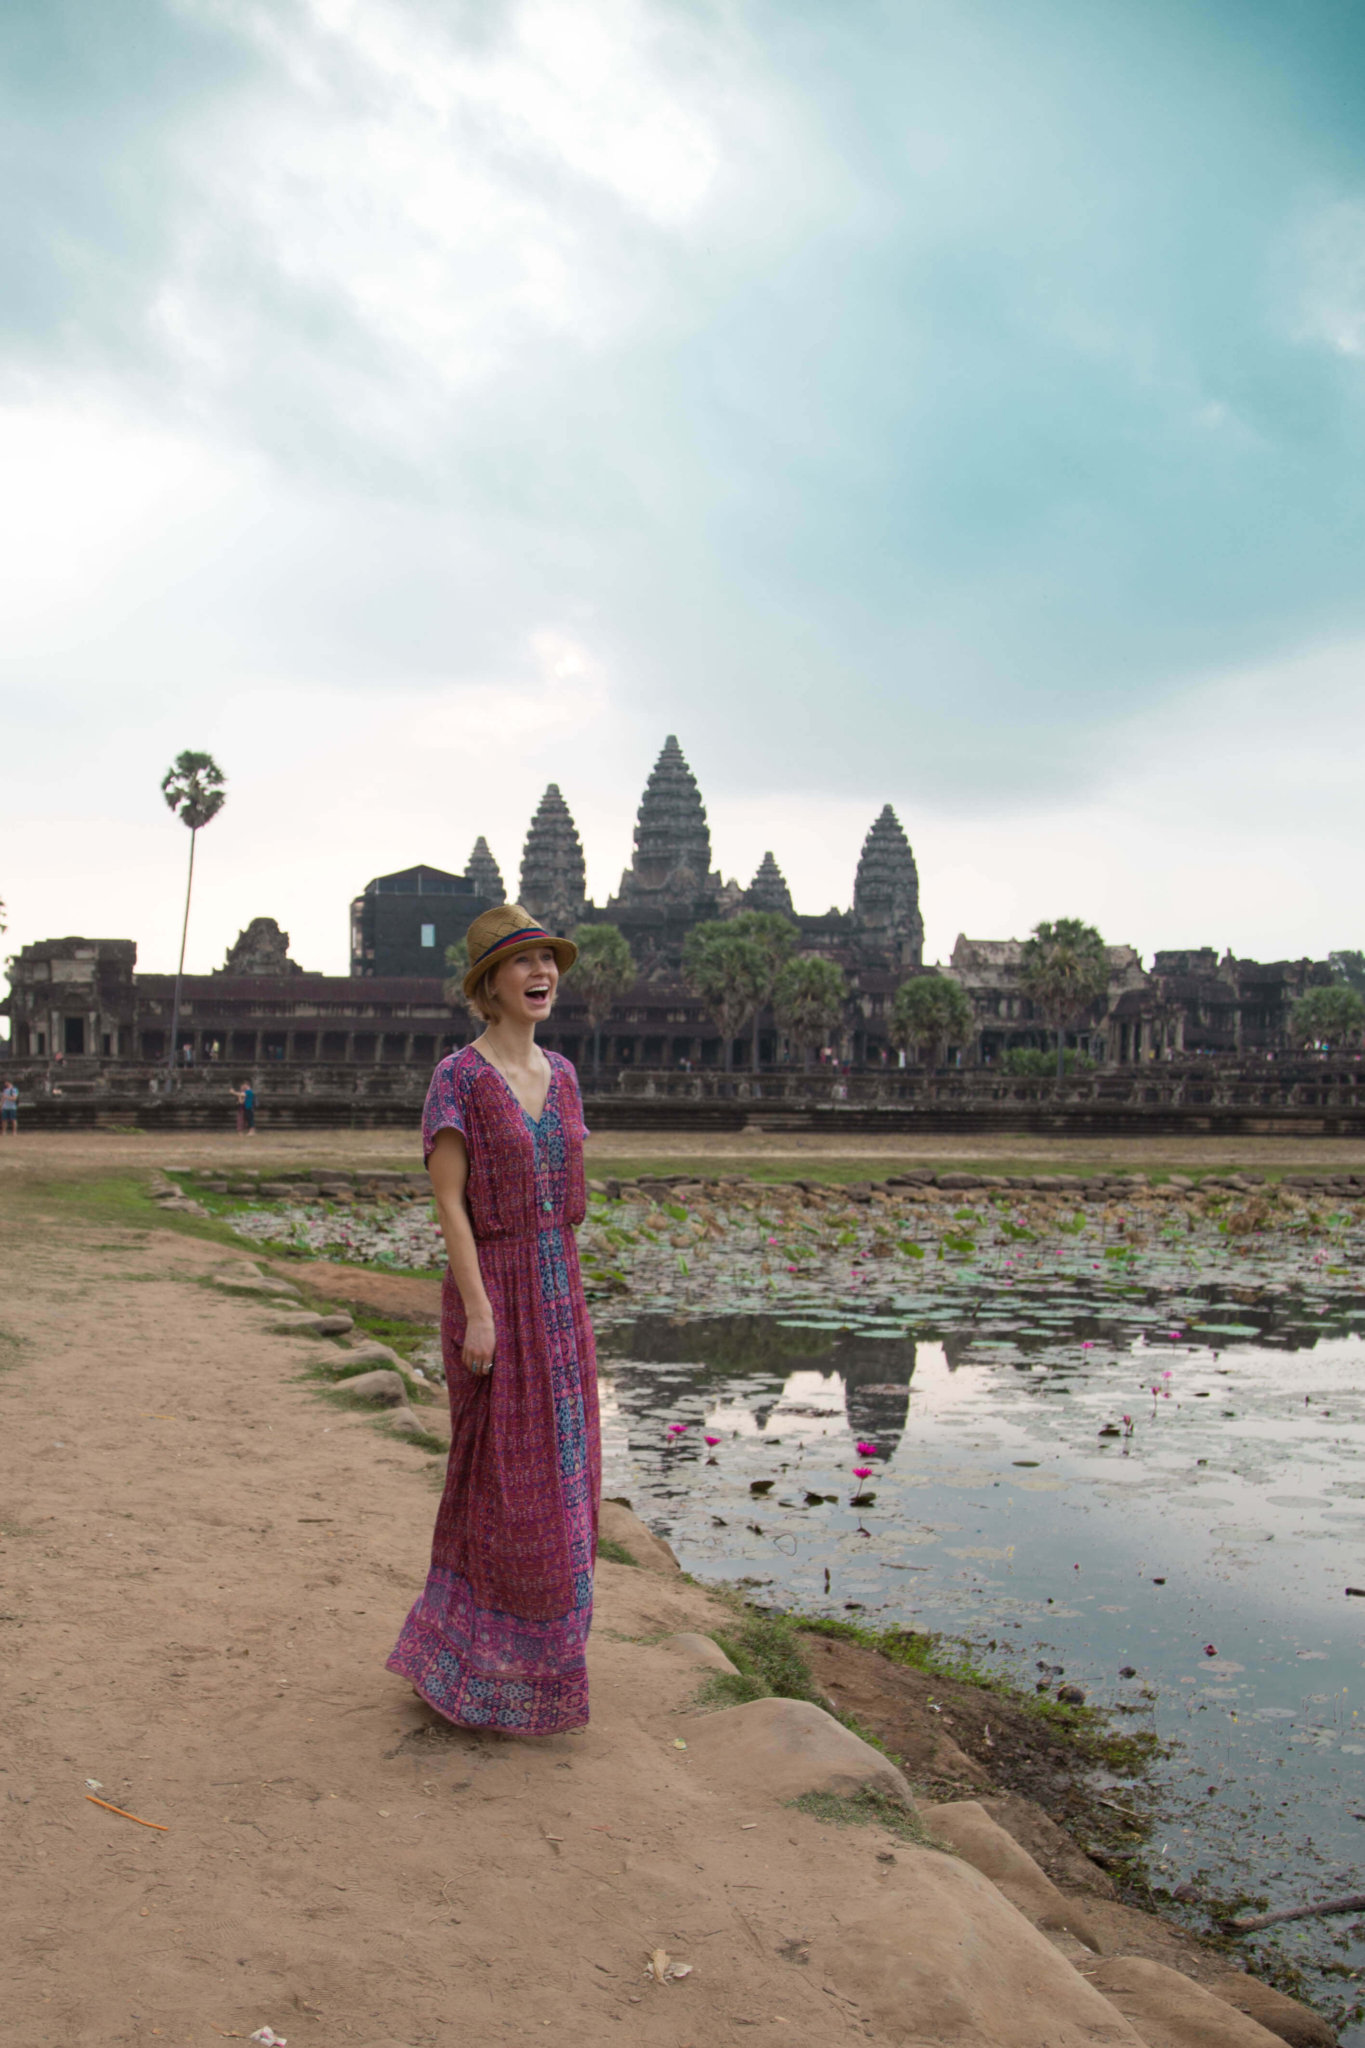 What to Wear to Angkor Wat, What to wear to a temple, Outfit for Angkor Wat, Angkor Wat, Siem Reap, Cambodia, Best thing to wear to Angkor Wat, What to wear to Sunrise at Angkor Wat, Outfit for sunrise at Angkor Wat, Wanderluluu